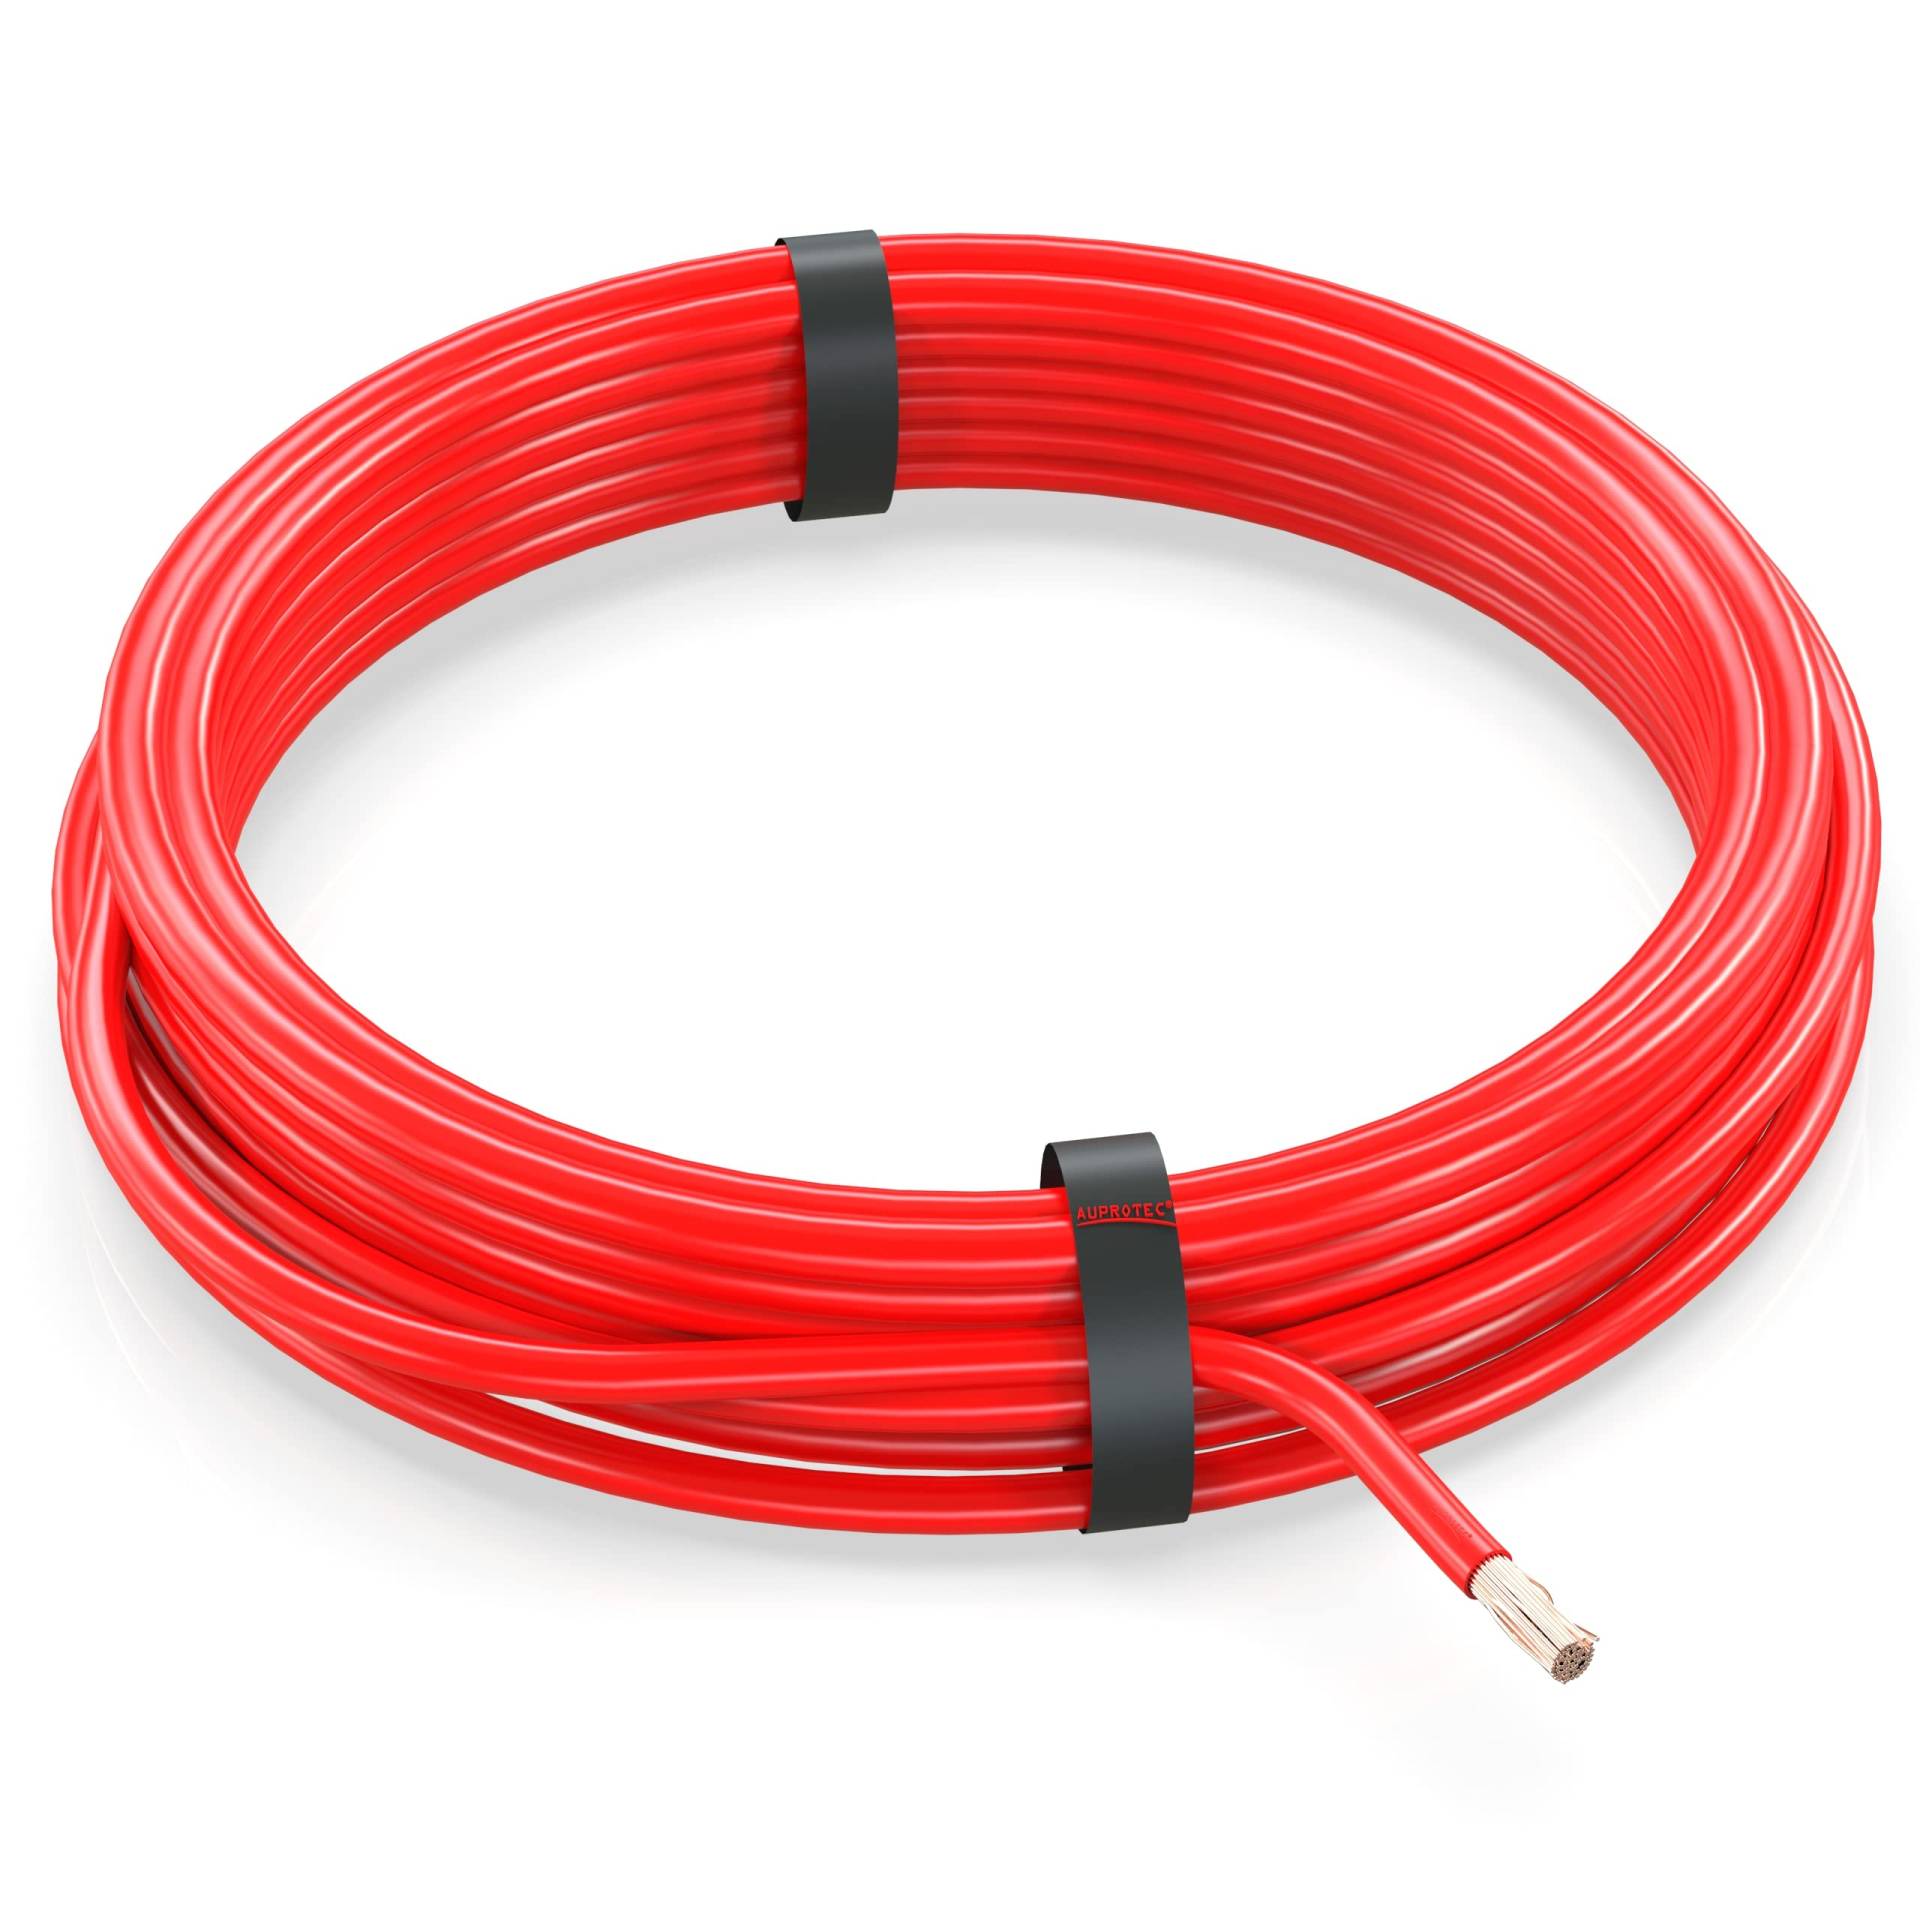 AUPROTEC 5m Fahrzeugleitung 0,75 mm² FLRY-B Auto Kabel als Ring Farbe rot von AUPROTEC